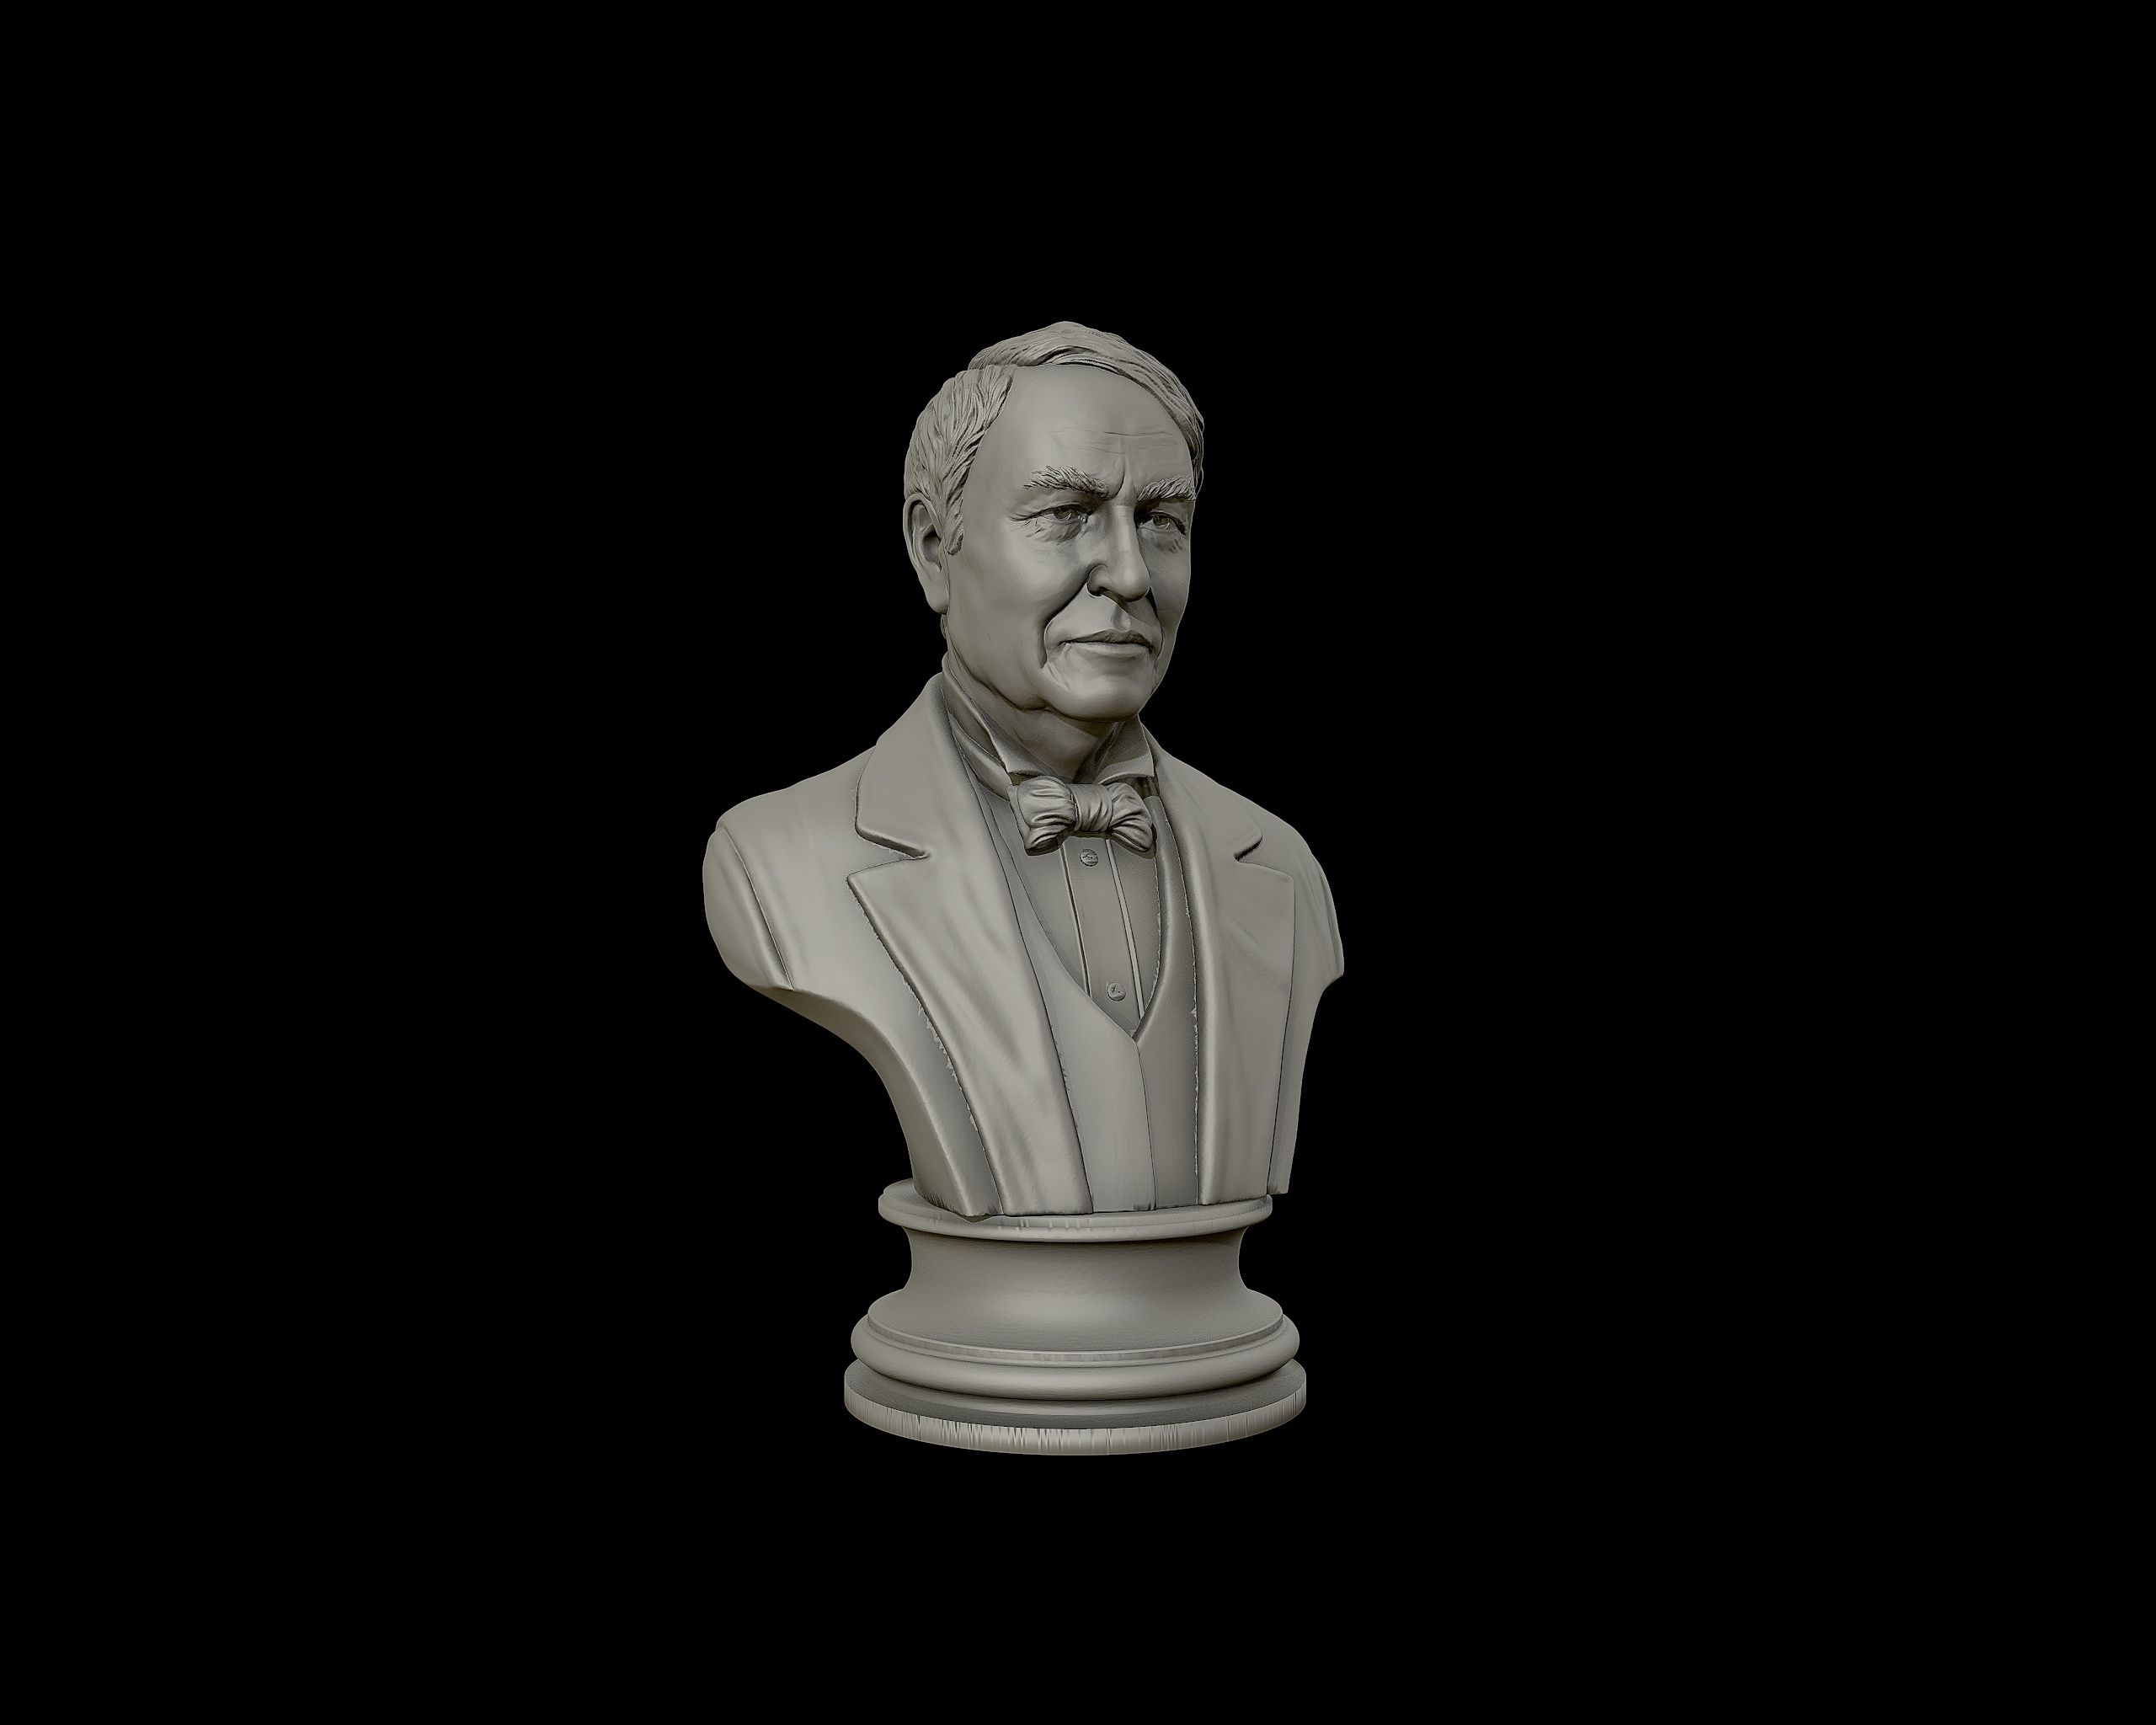 Thomas Edison 3D Printed Bust Famous American Inventor Art FREE SHIPPING 